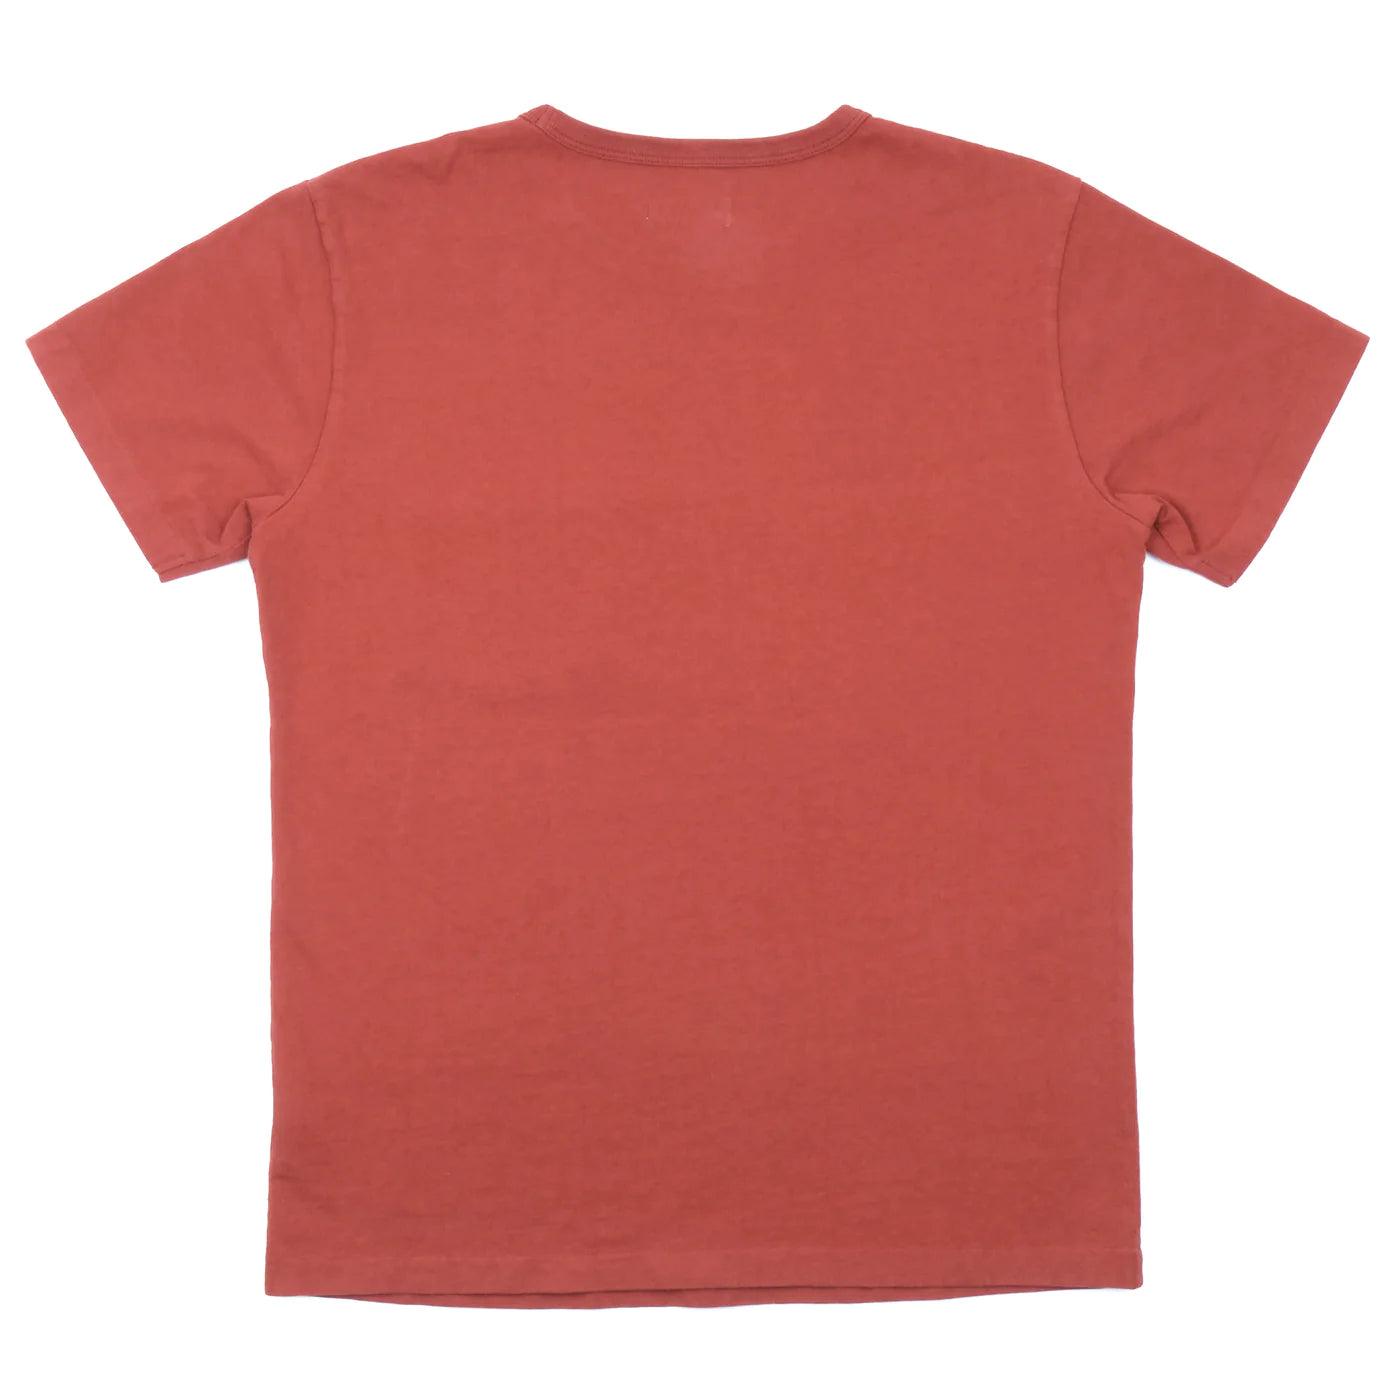 Freenote Cloth Heavyweight 13oz Pocket Tee - Picante - Guilty Party